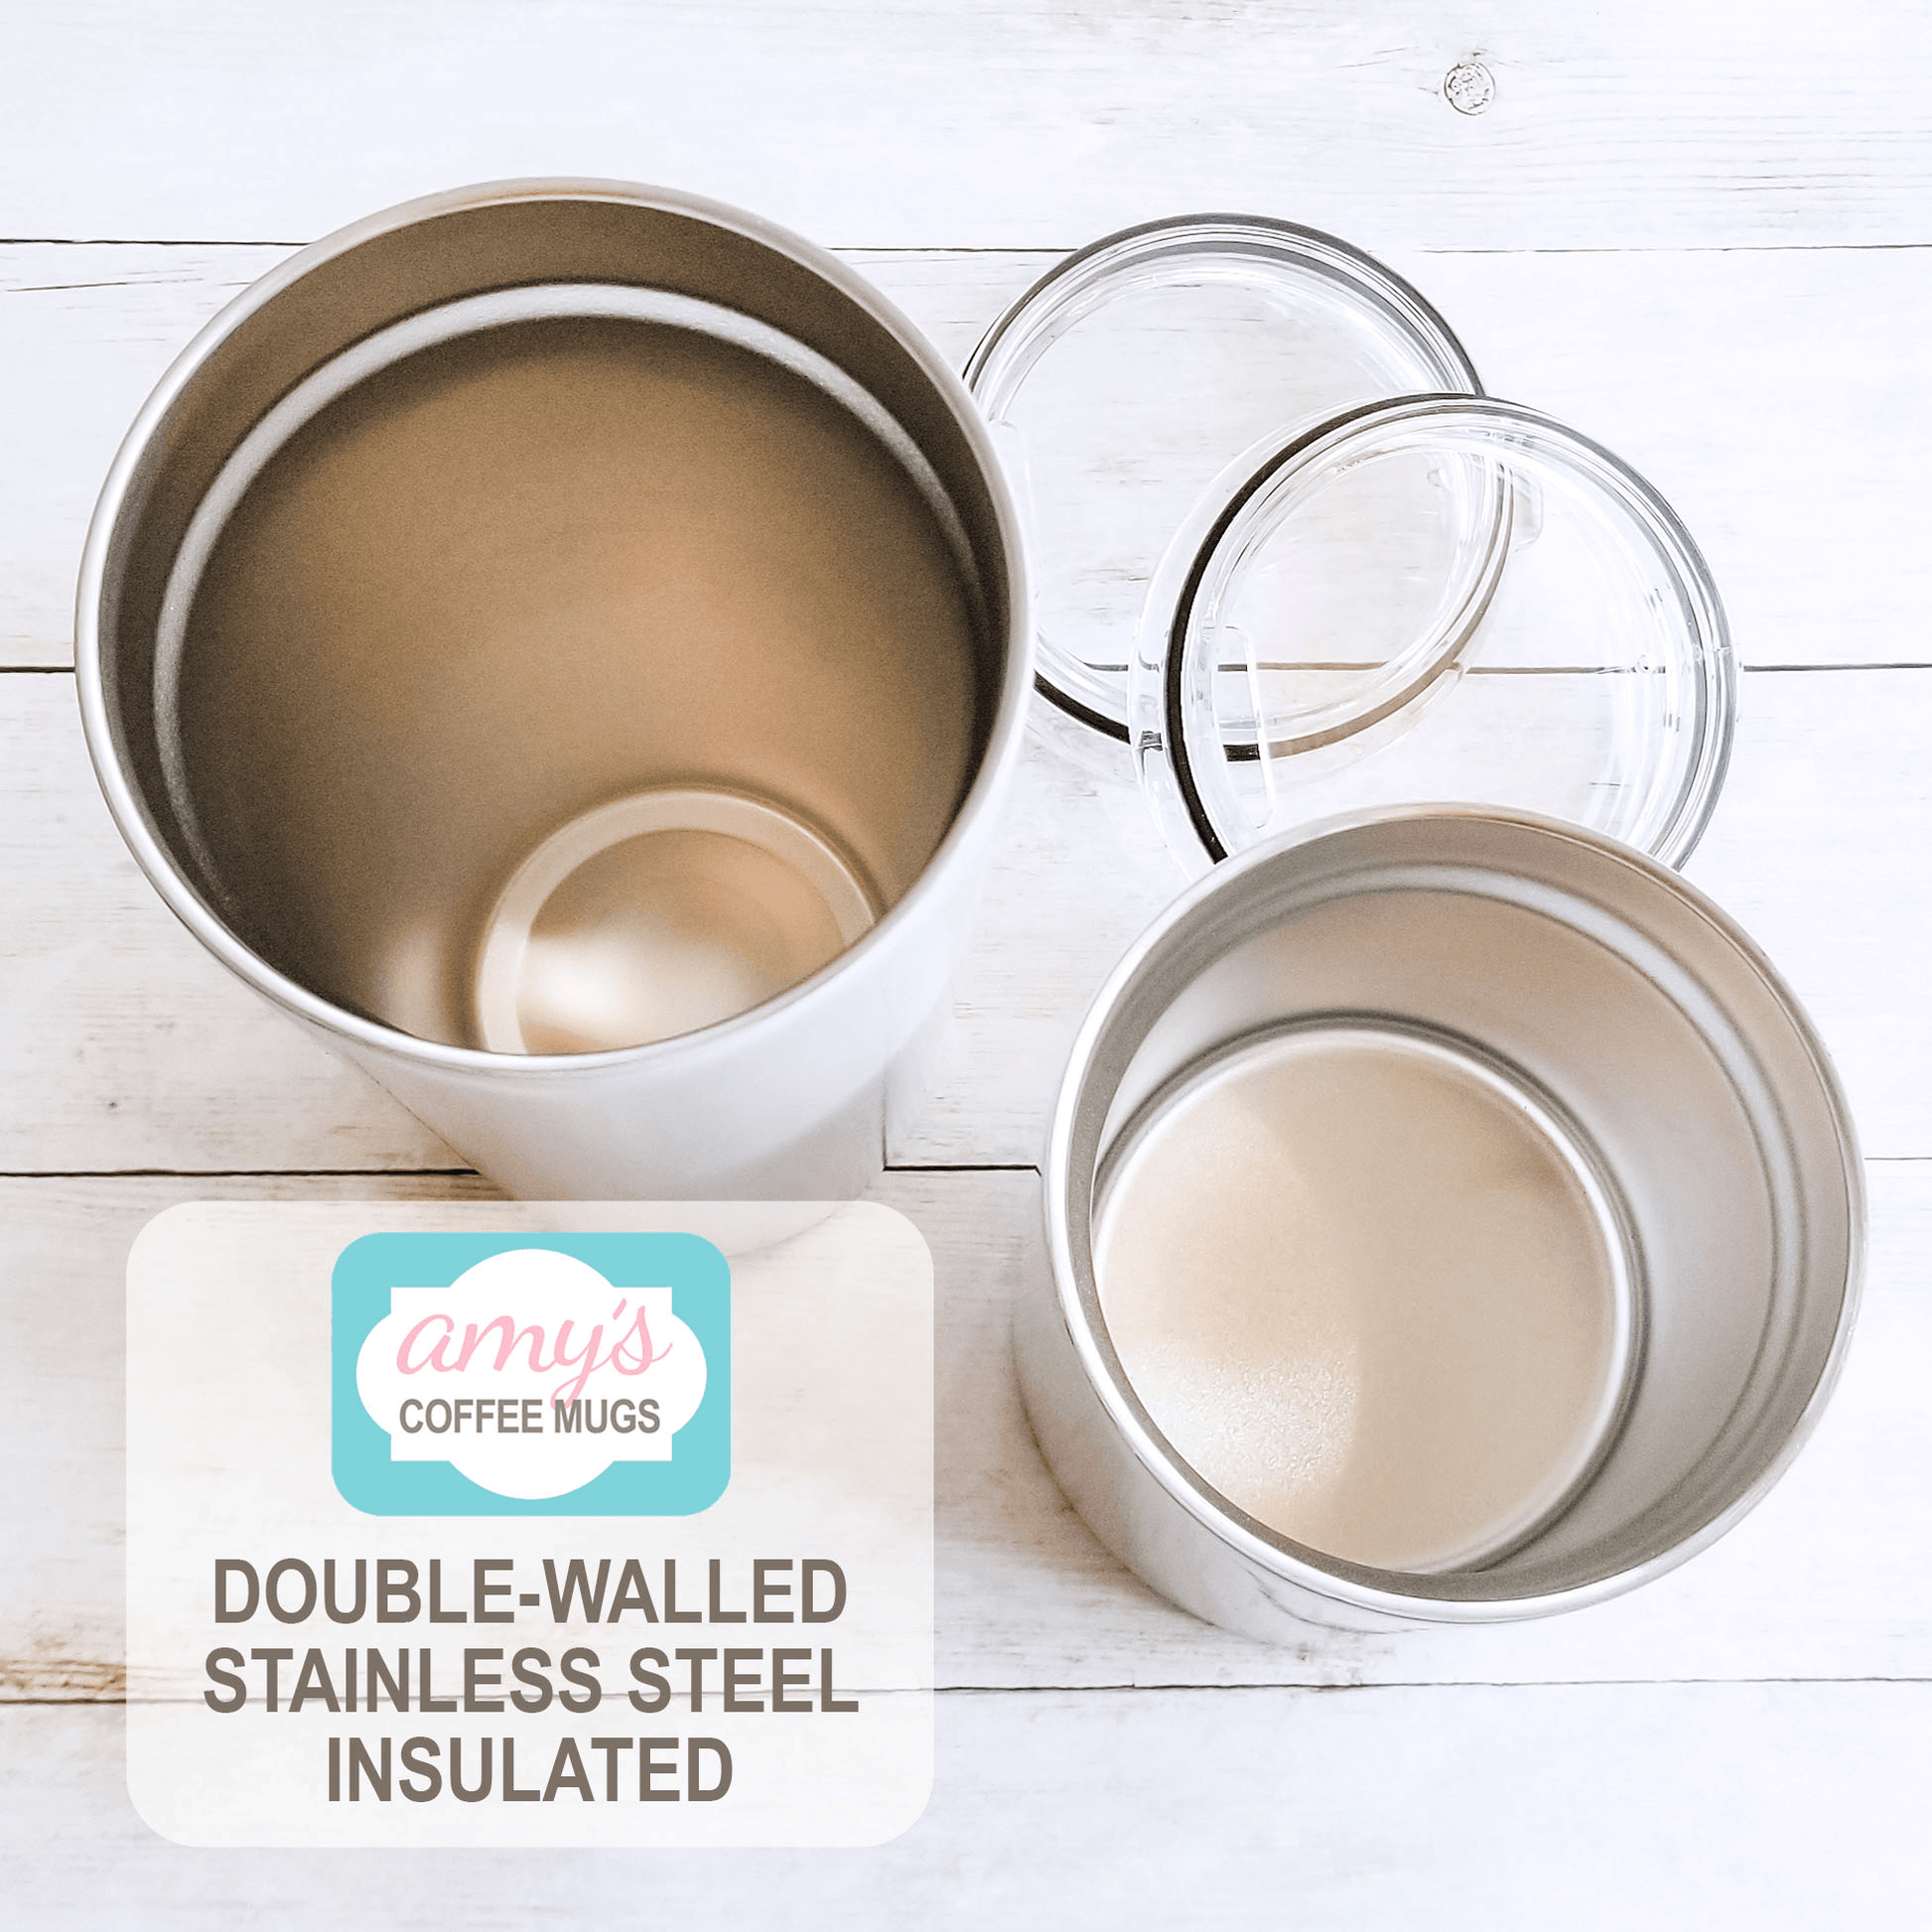 Double-walled stainless steel insulated inside of tumbler cups at Amy's Coffee Mugs